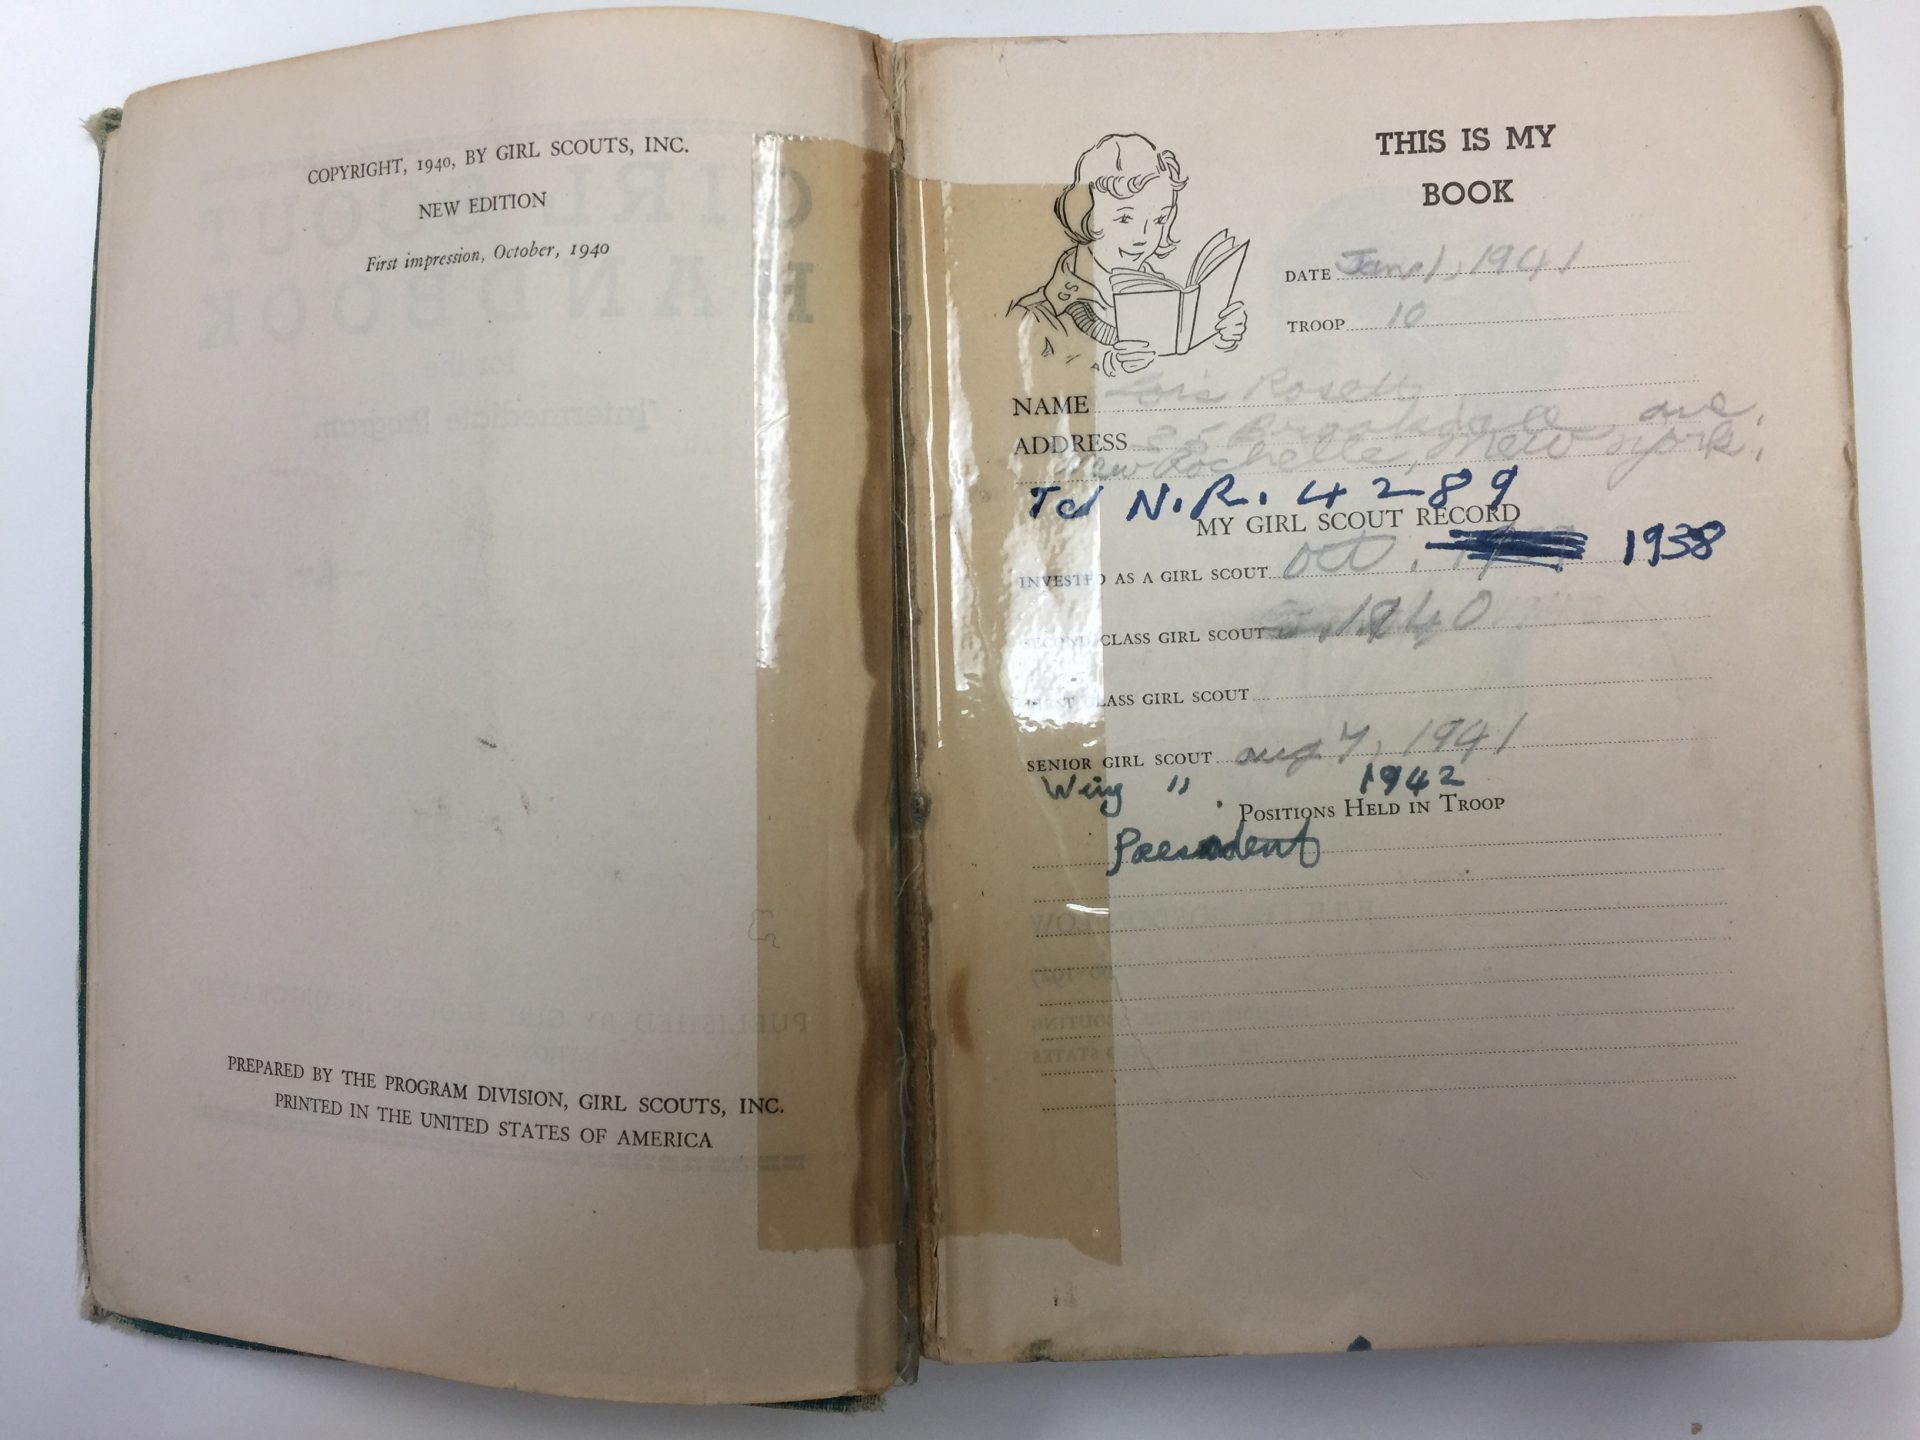 This is my book (handwritten notes 1938-42).